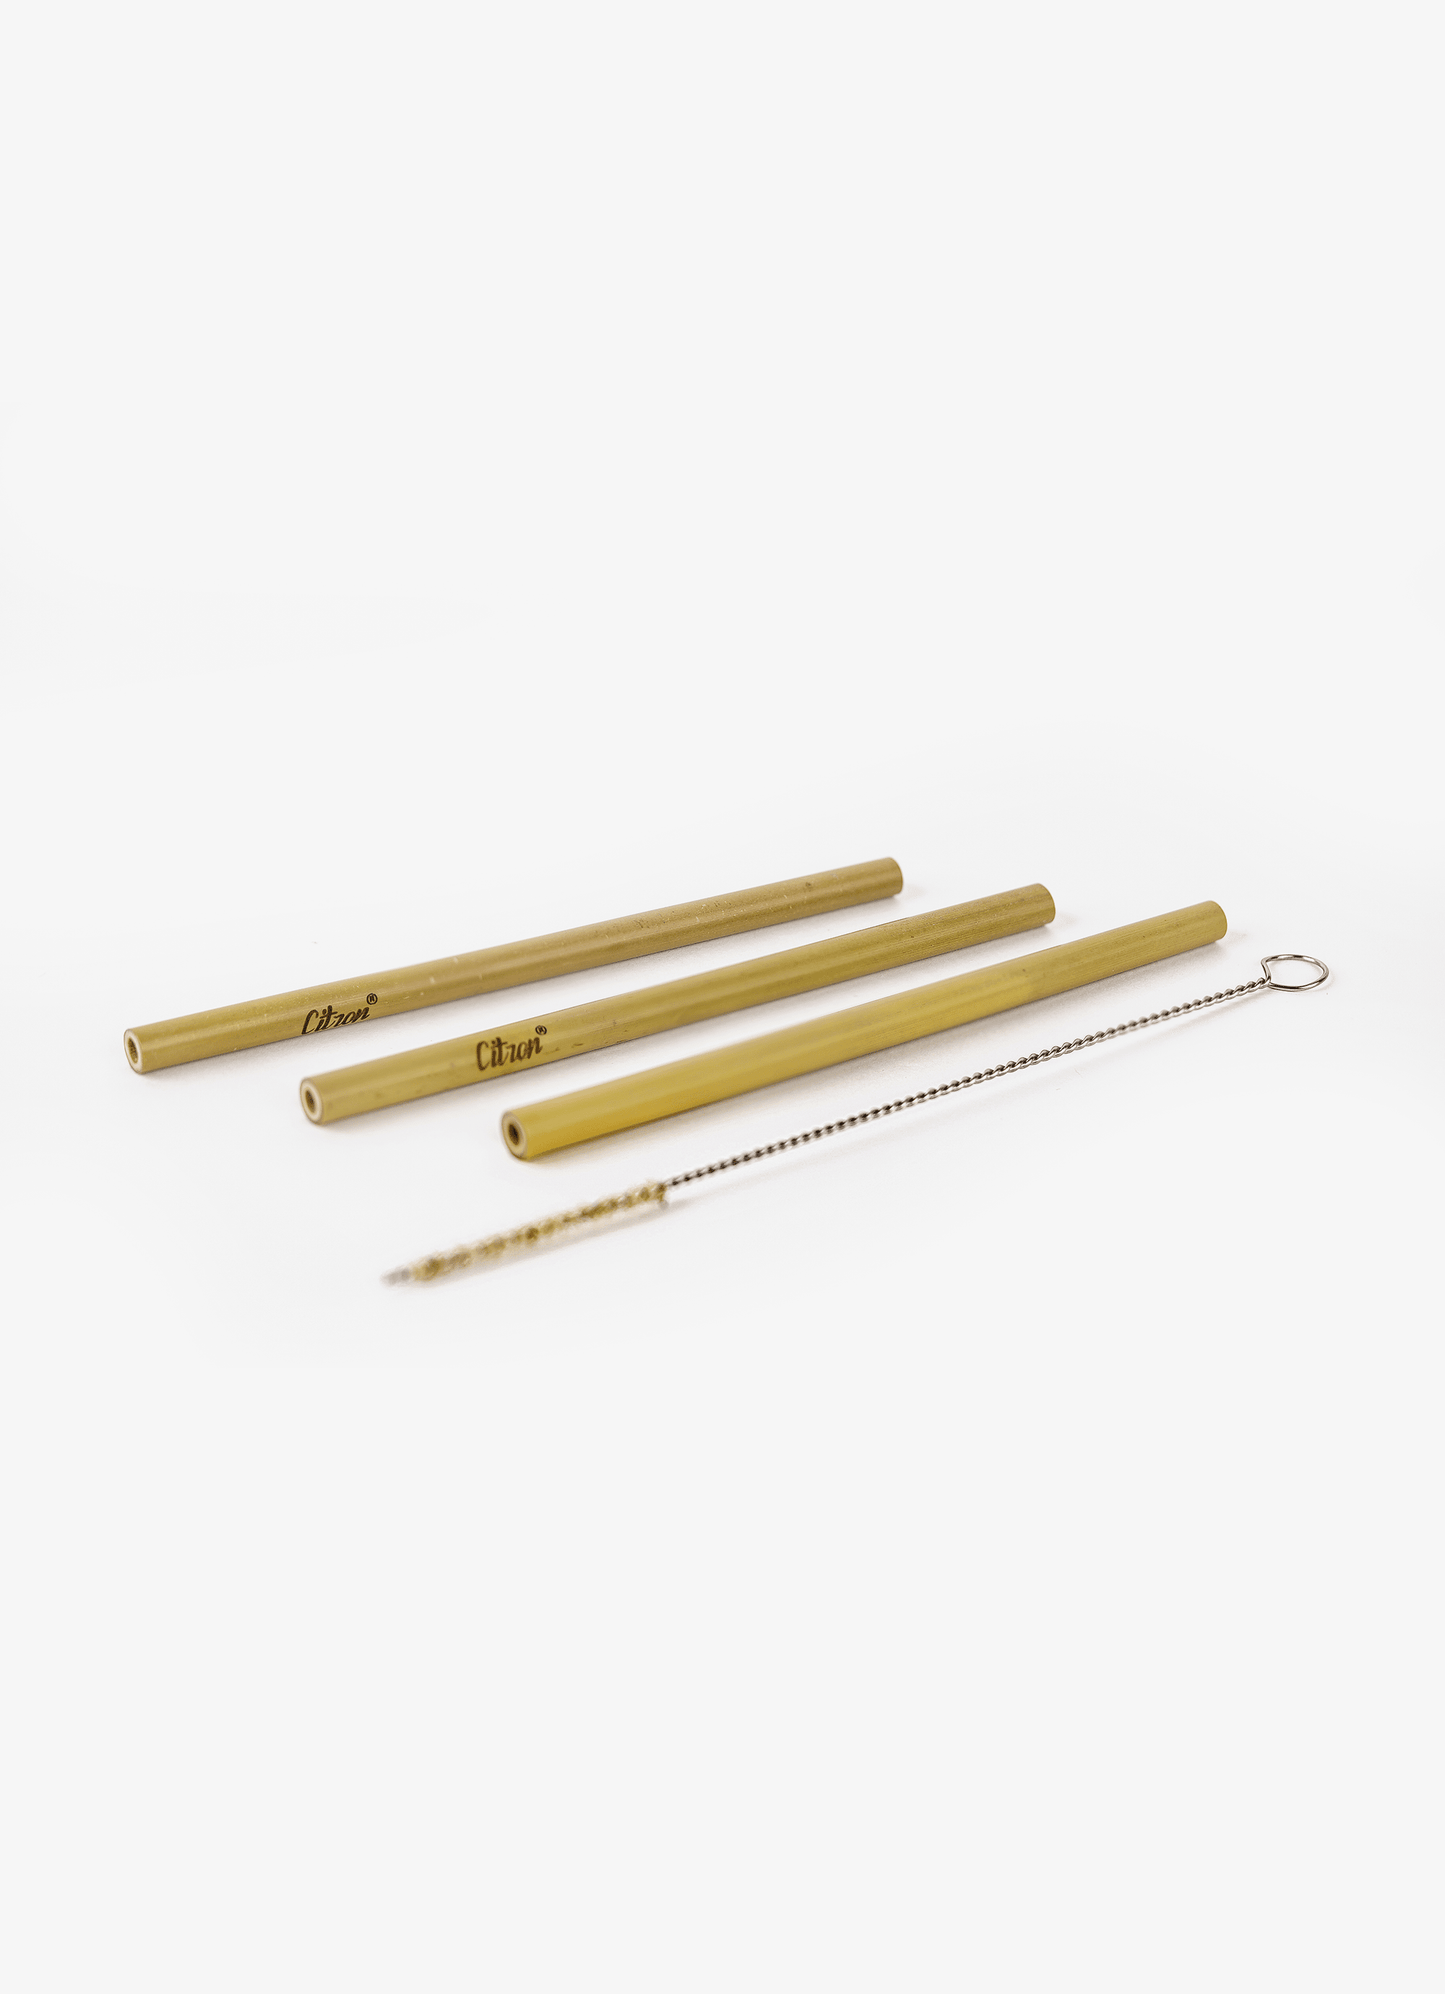 Bamboo Straw Set - 3 piece + cleaning Brush